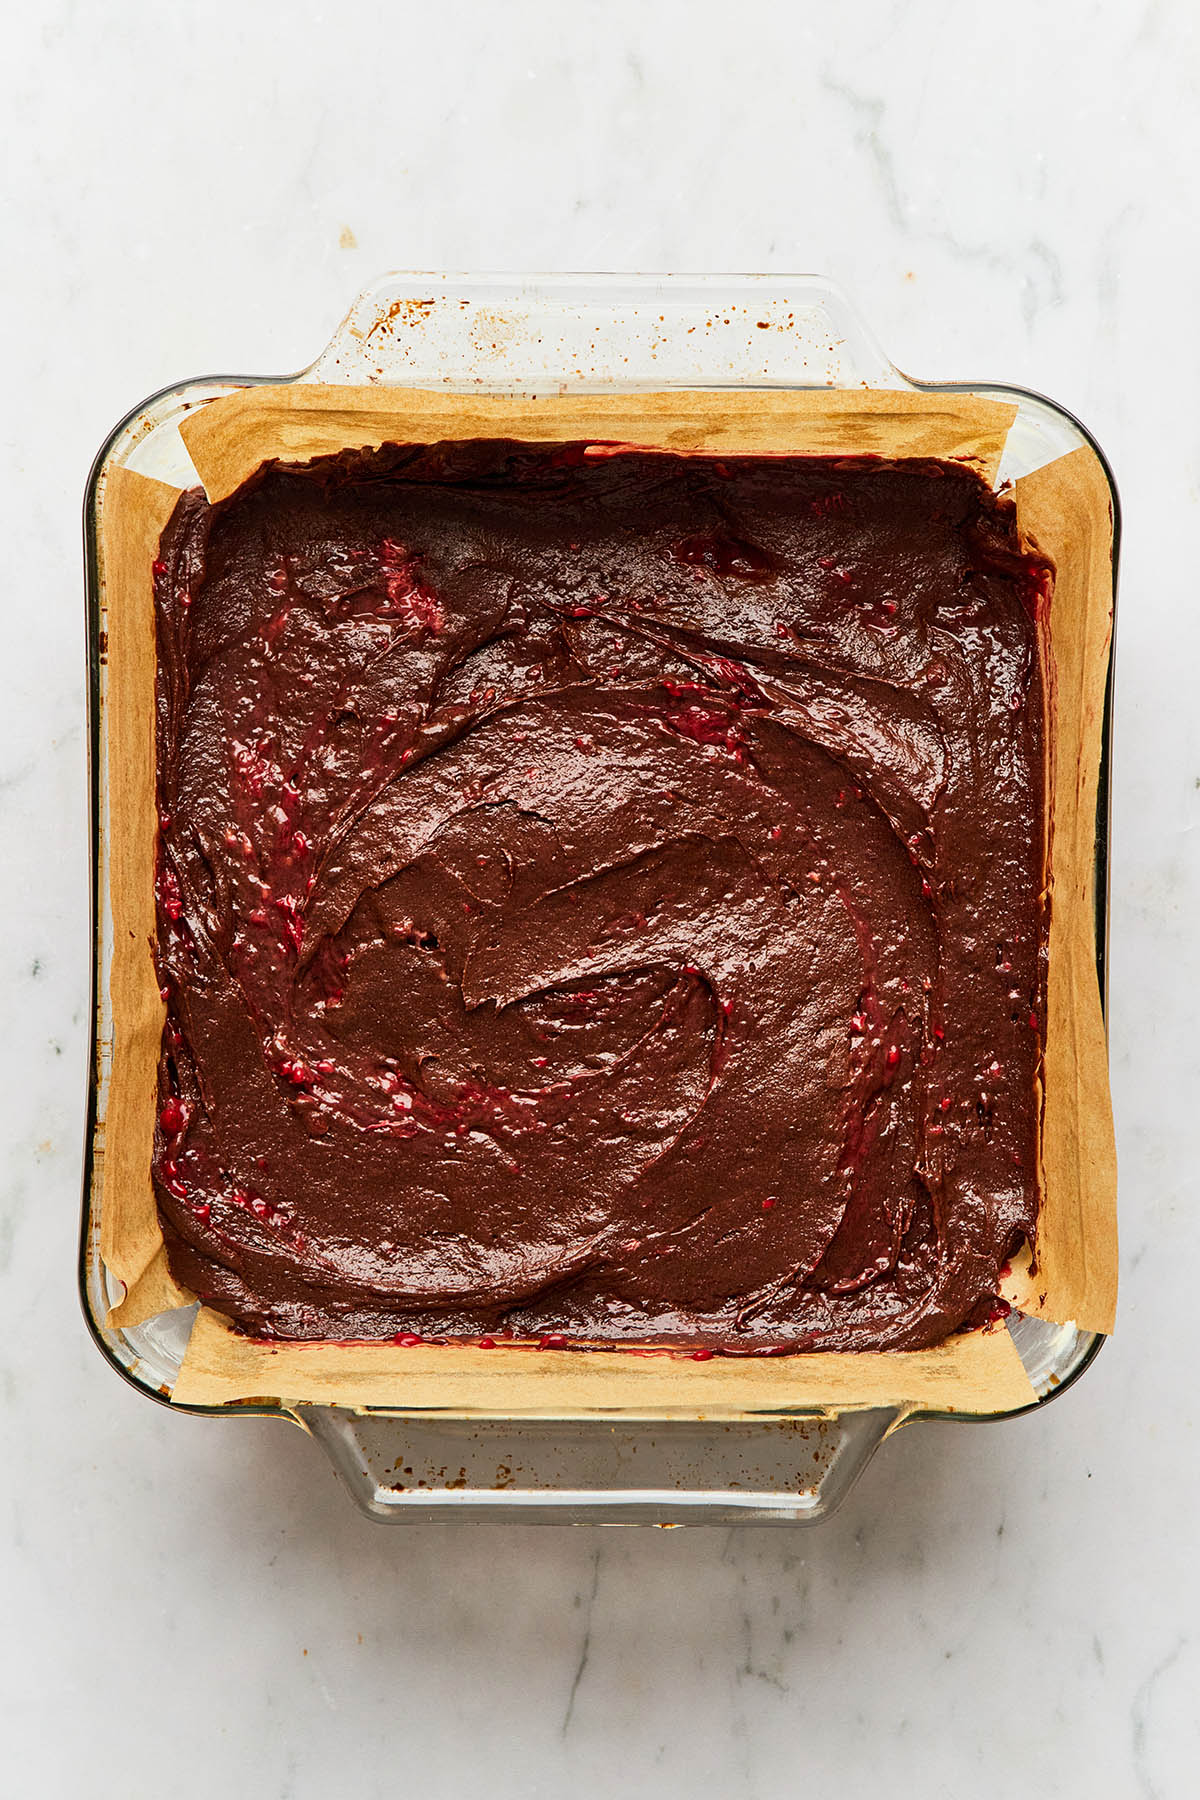 Chocolate batter in a parchment-lined square baking dish.